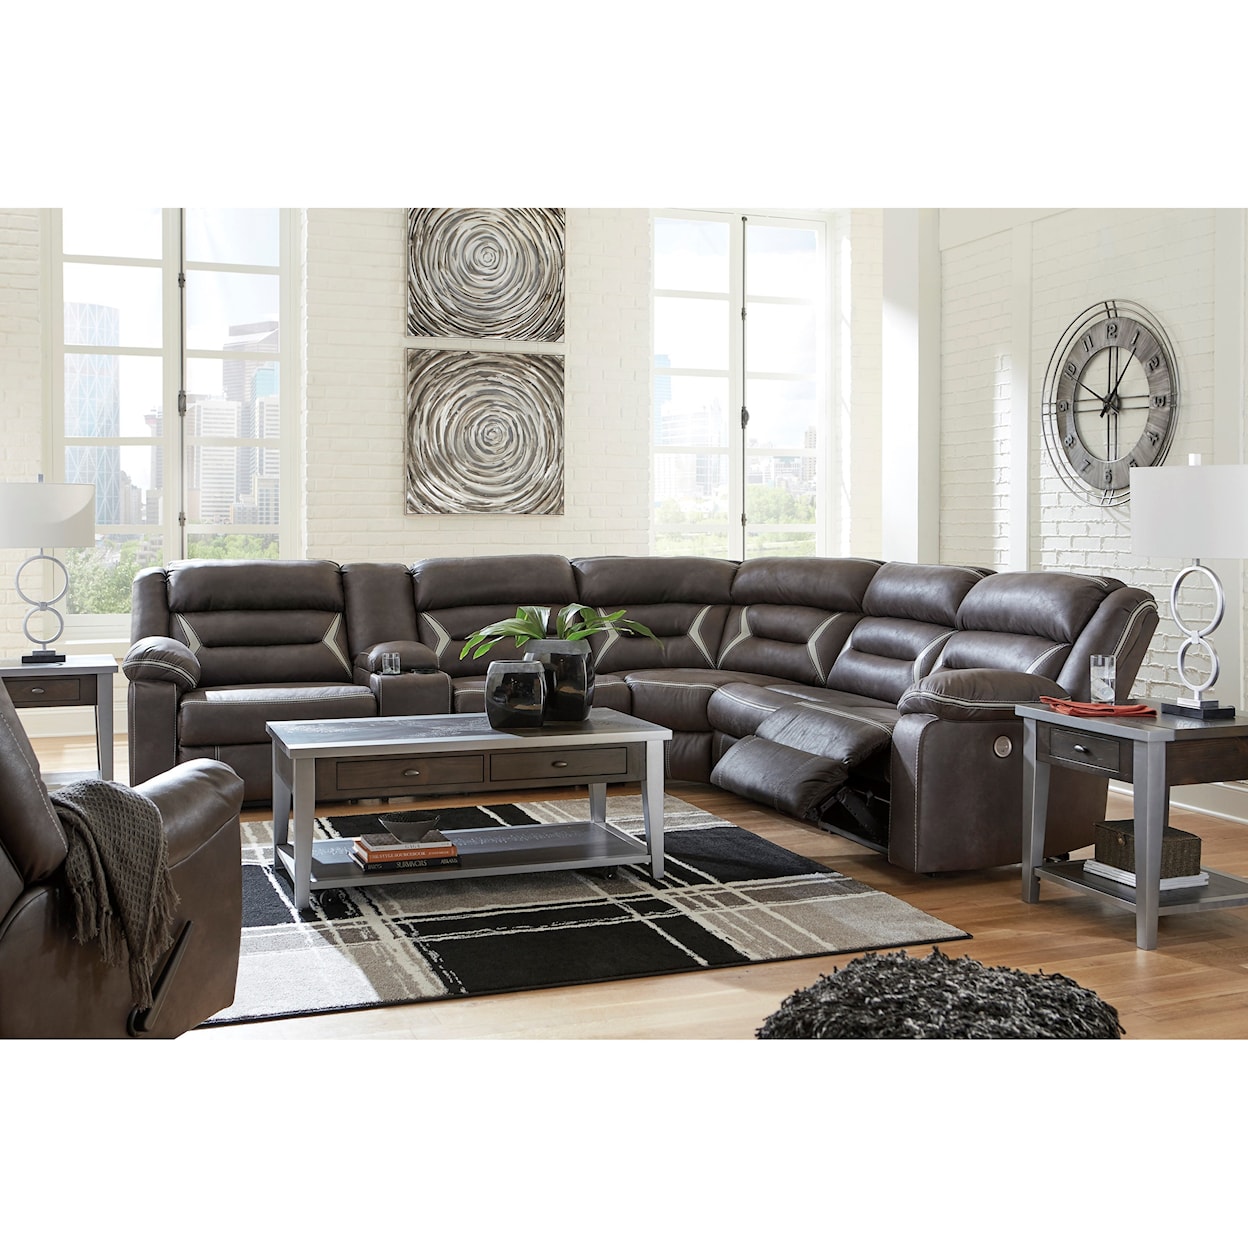 Ashley Signature Design Kincord Power Reclining Living Room Group